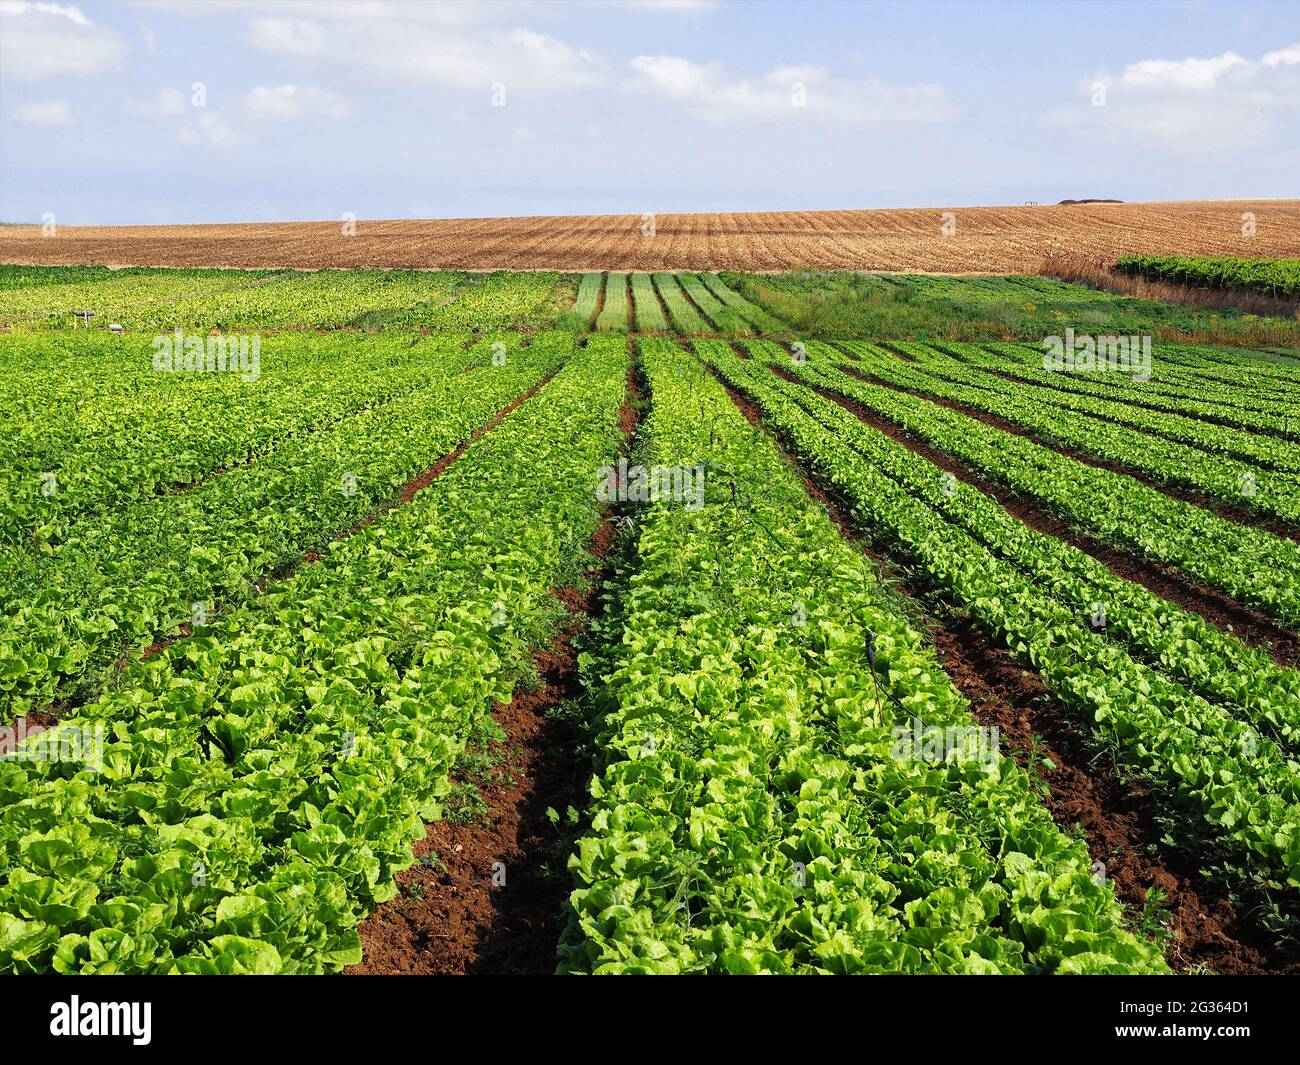 A field with fresh lettuce leaves. Israeli agriculture in the southern region. Stock Photo